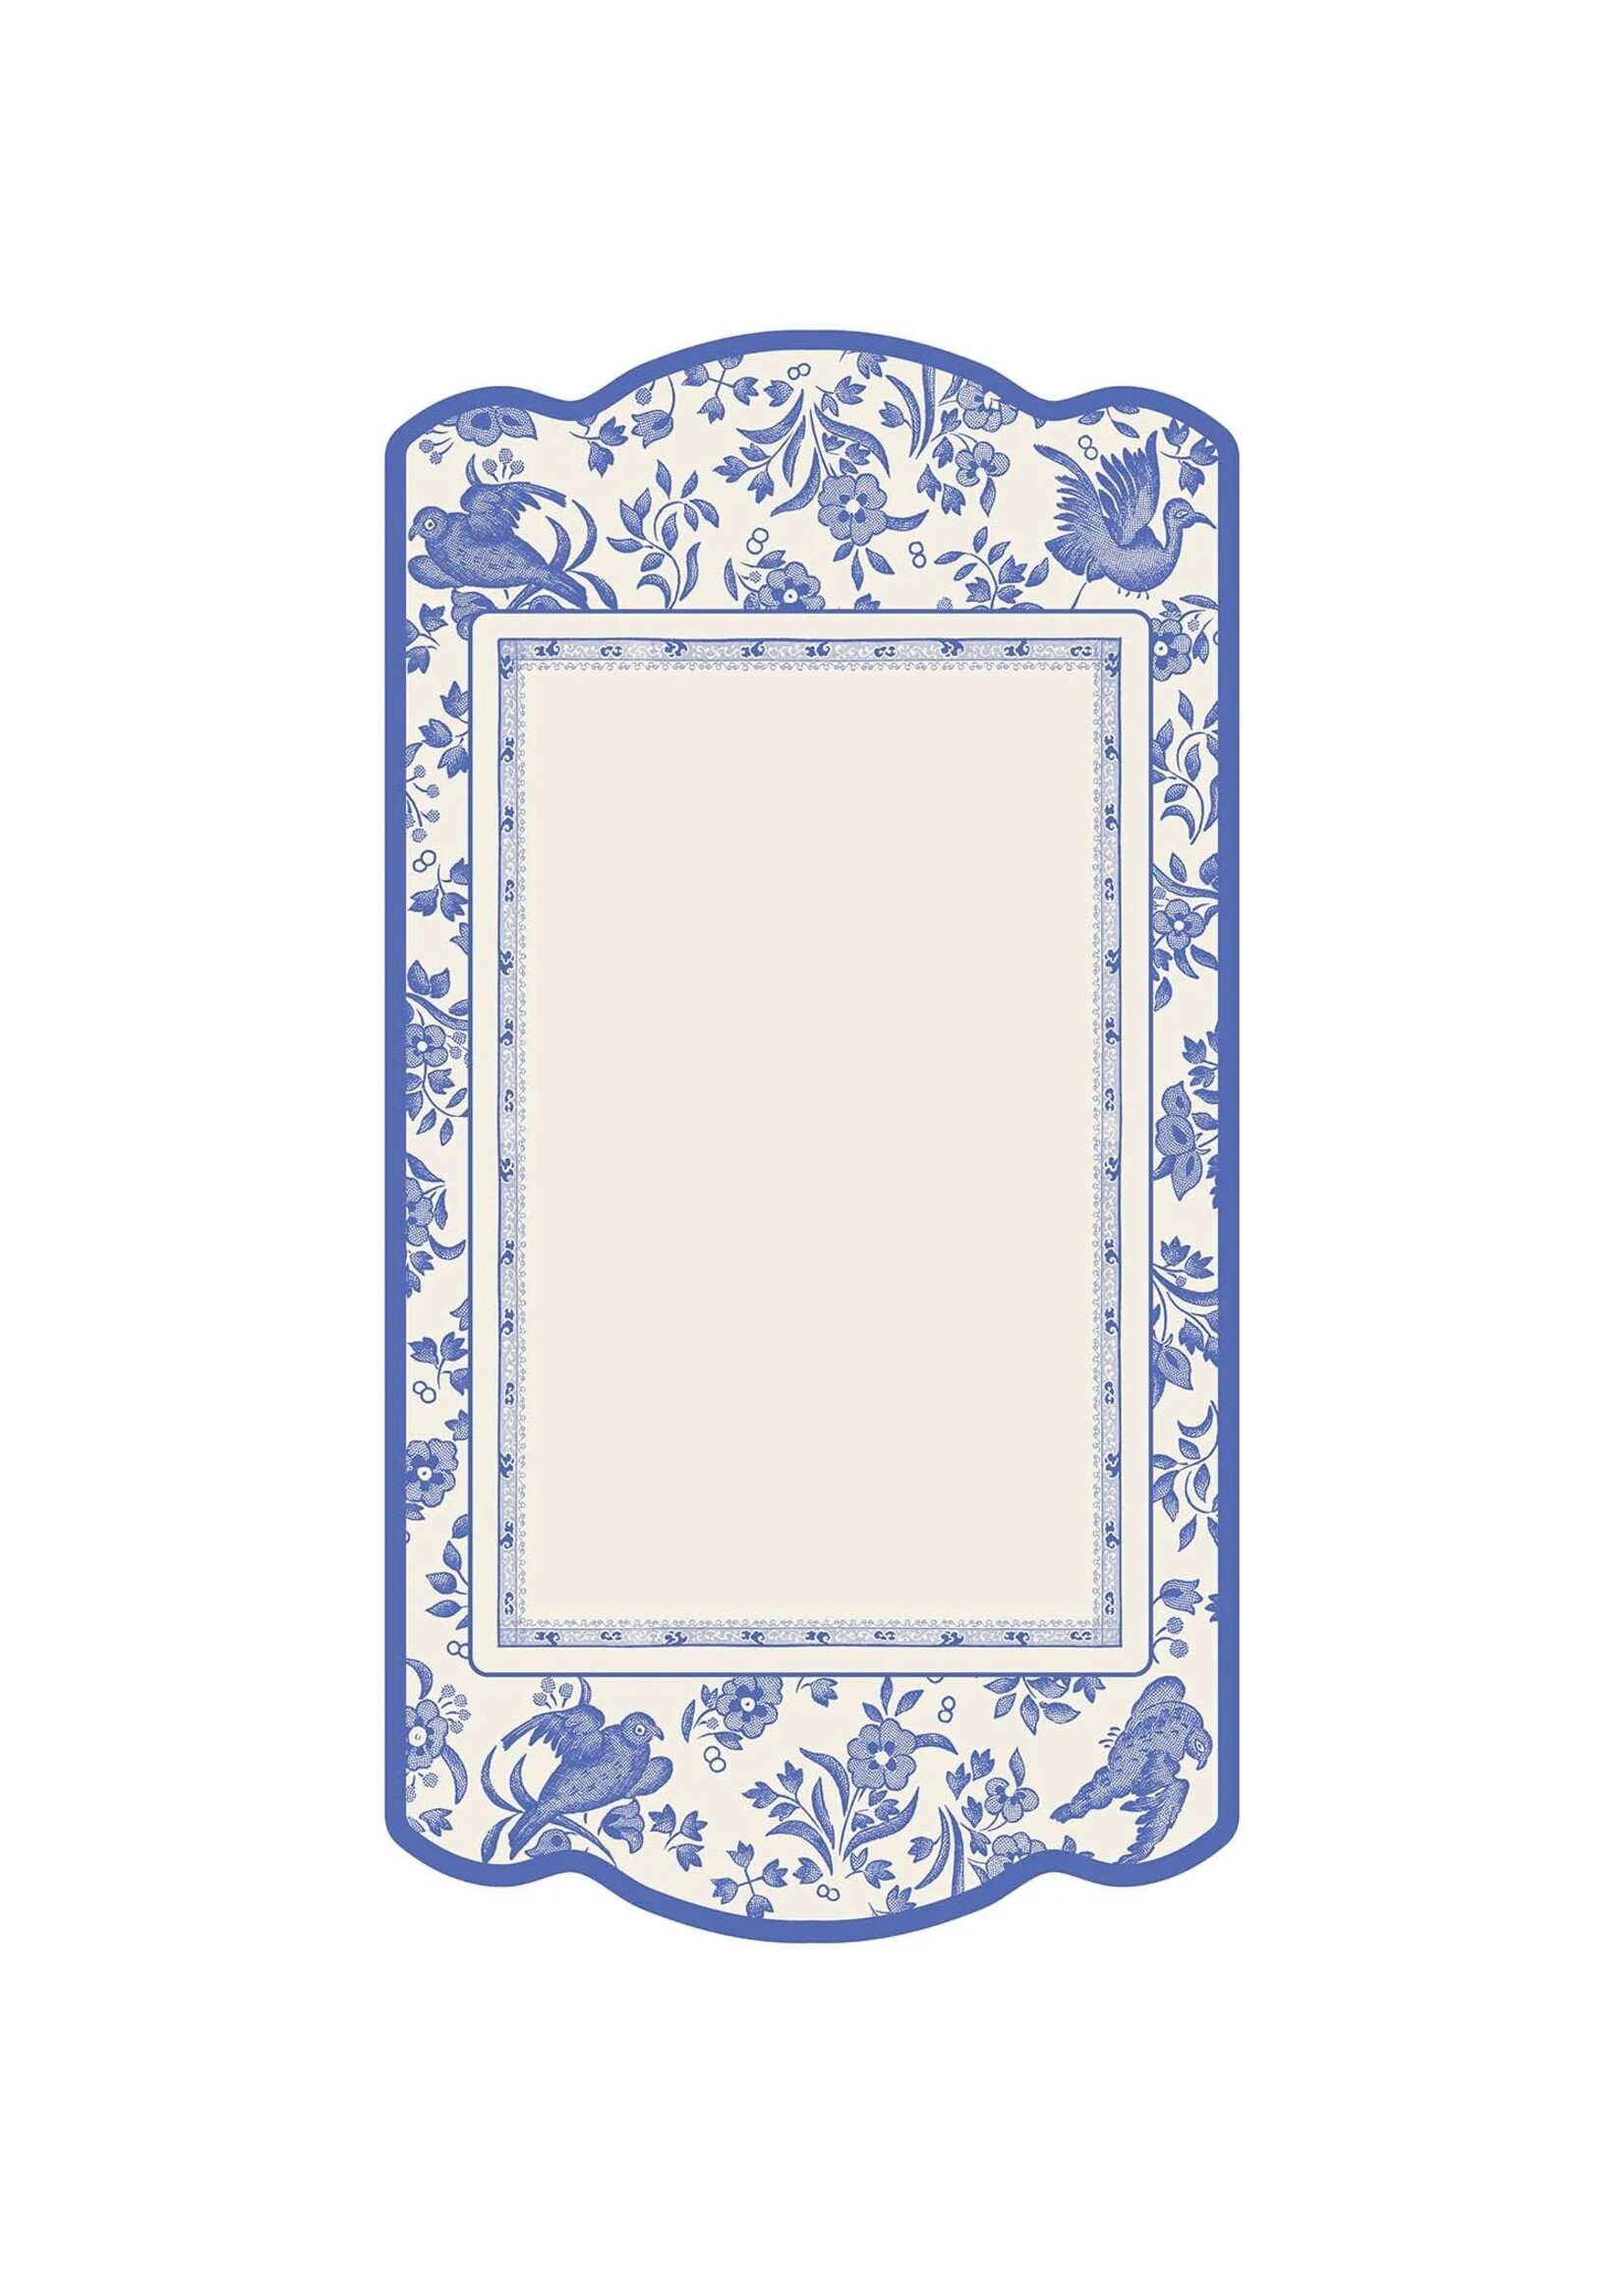 Hester & Cook Table Card - Regal Peacock Blue (pack of 12)